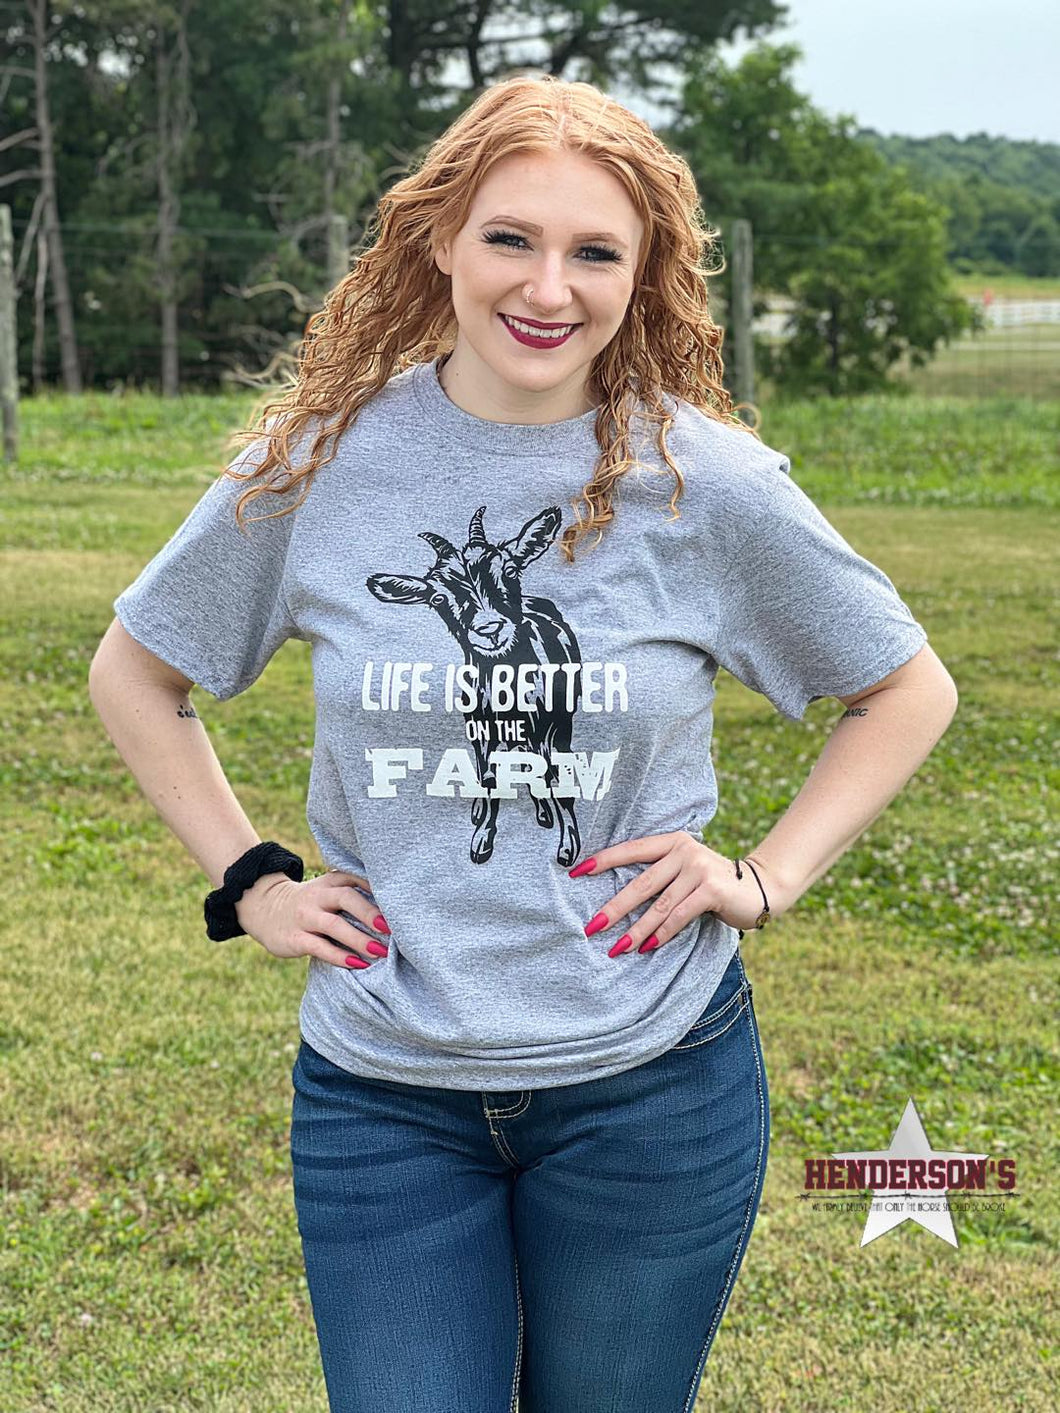 Life is Better on the Farm Tee - Henderson's Western Store